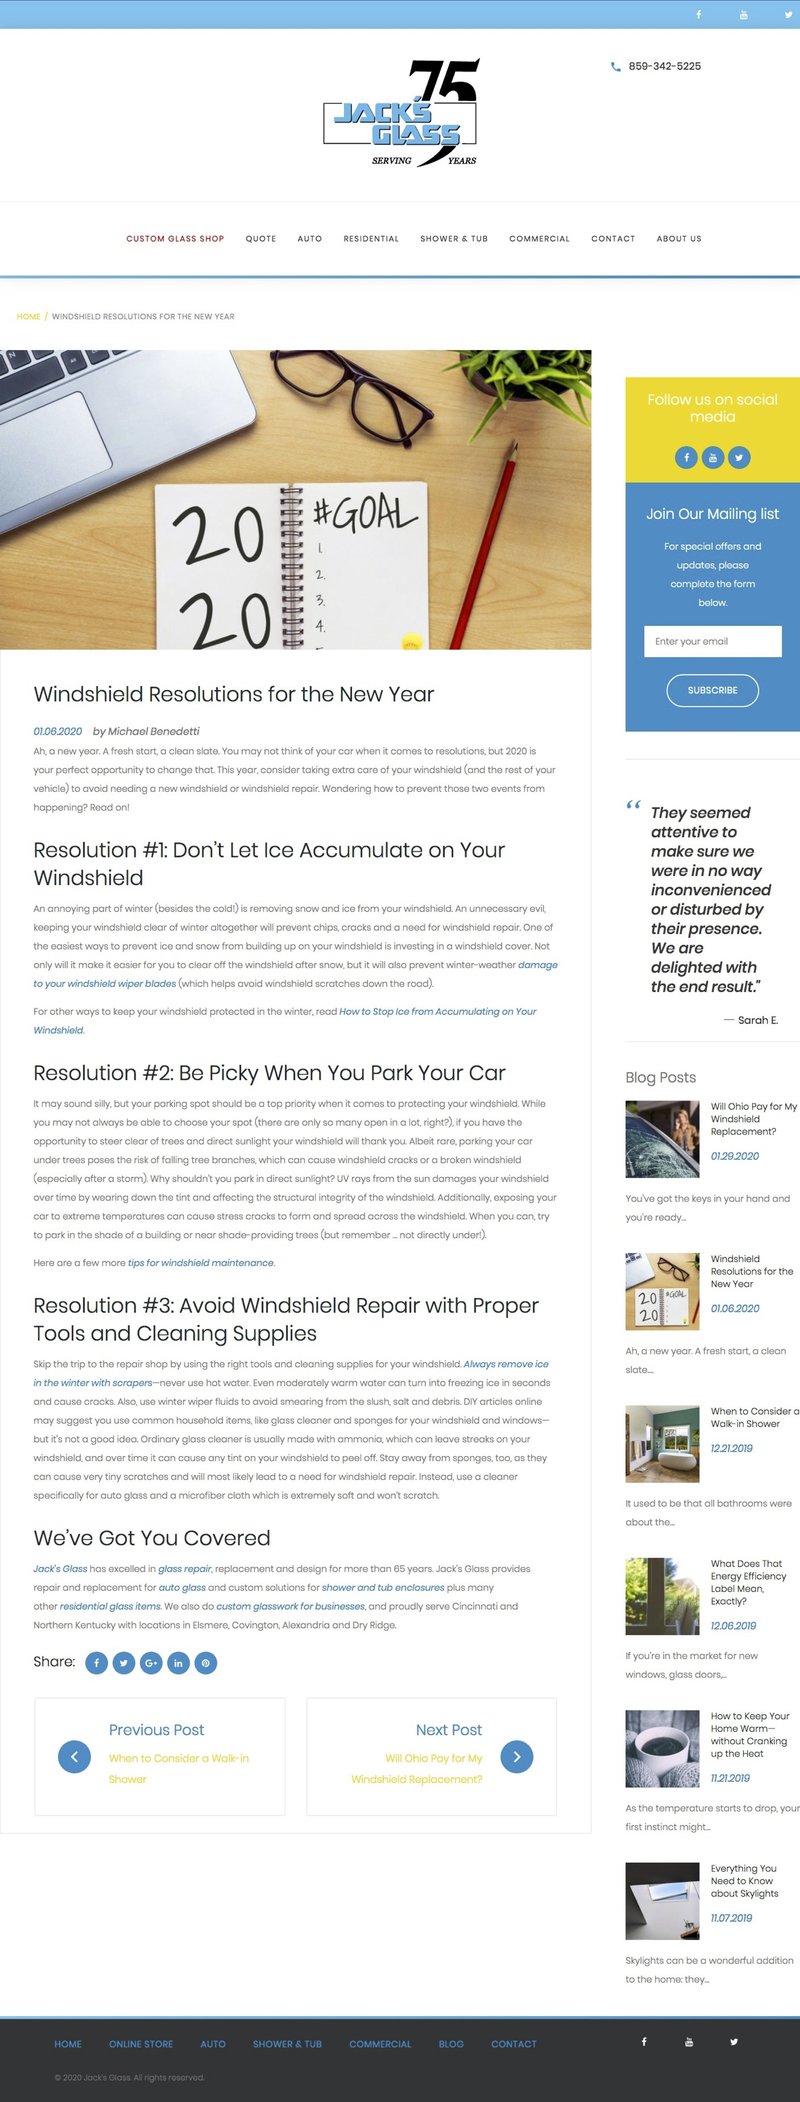 Windshield Resolutions for the New Year - Jack's Glass - jacksglassshop.com